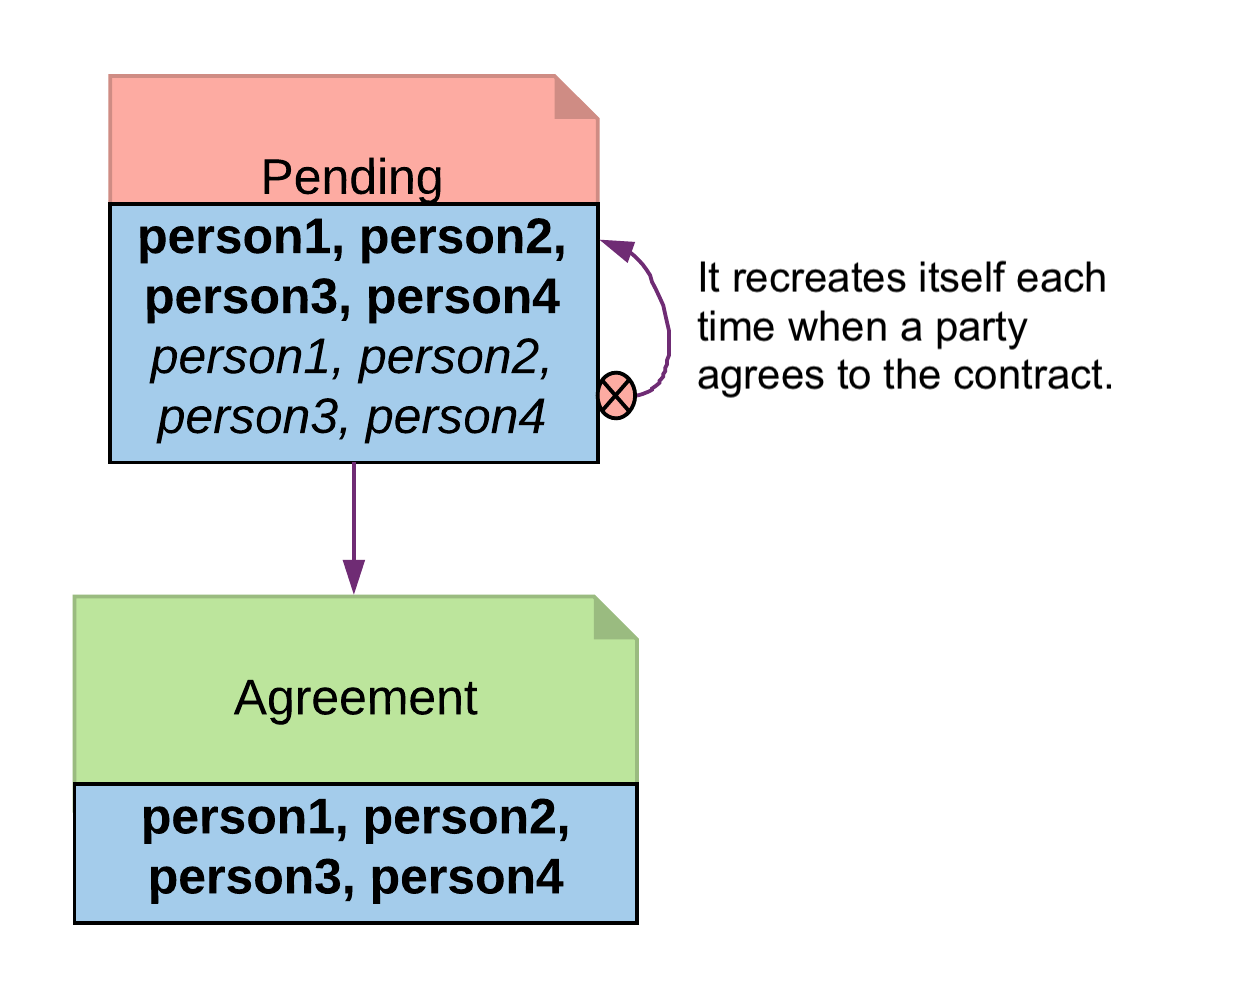 ../../_images/multiplepartyAgreement.png